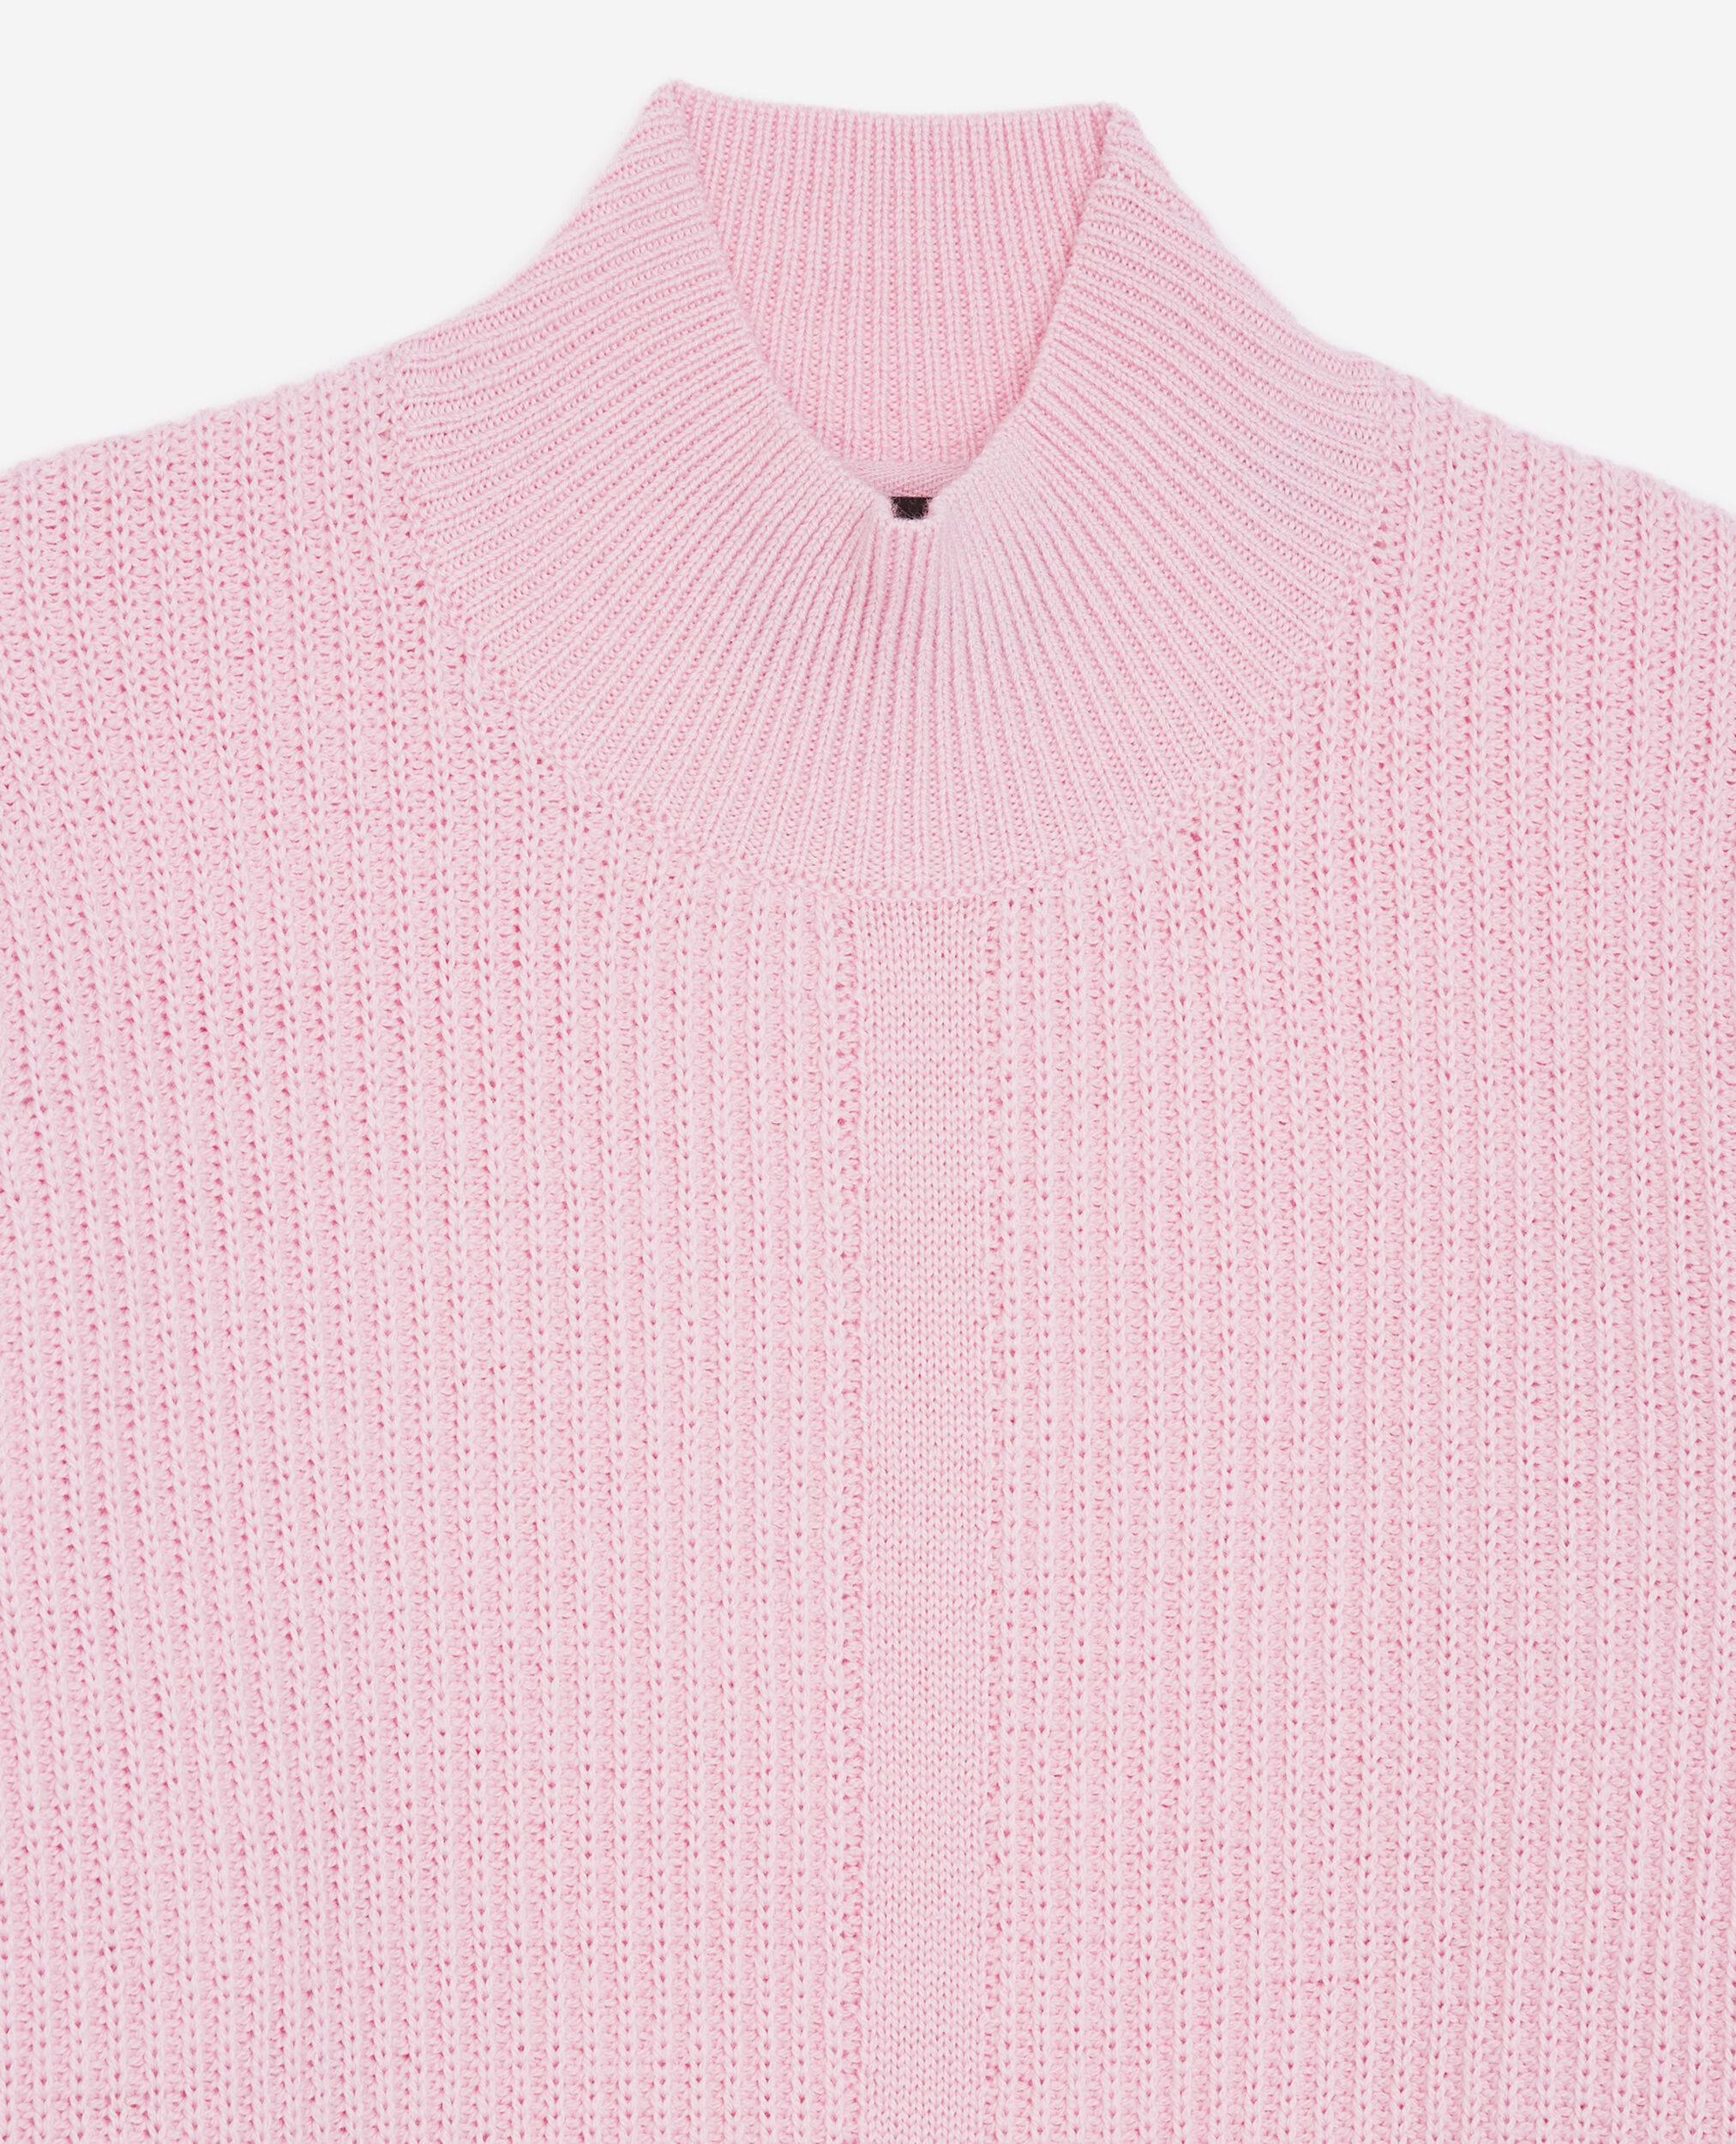 Wollpullover Merinowolle hellrosa weit, PINK, hi-res image number null